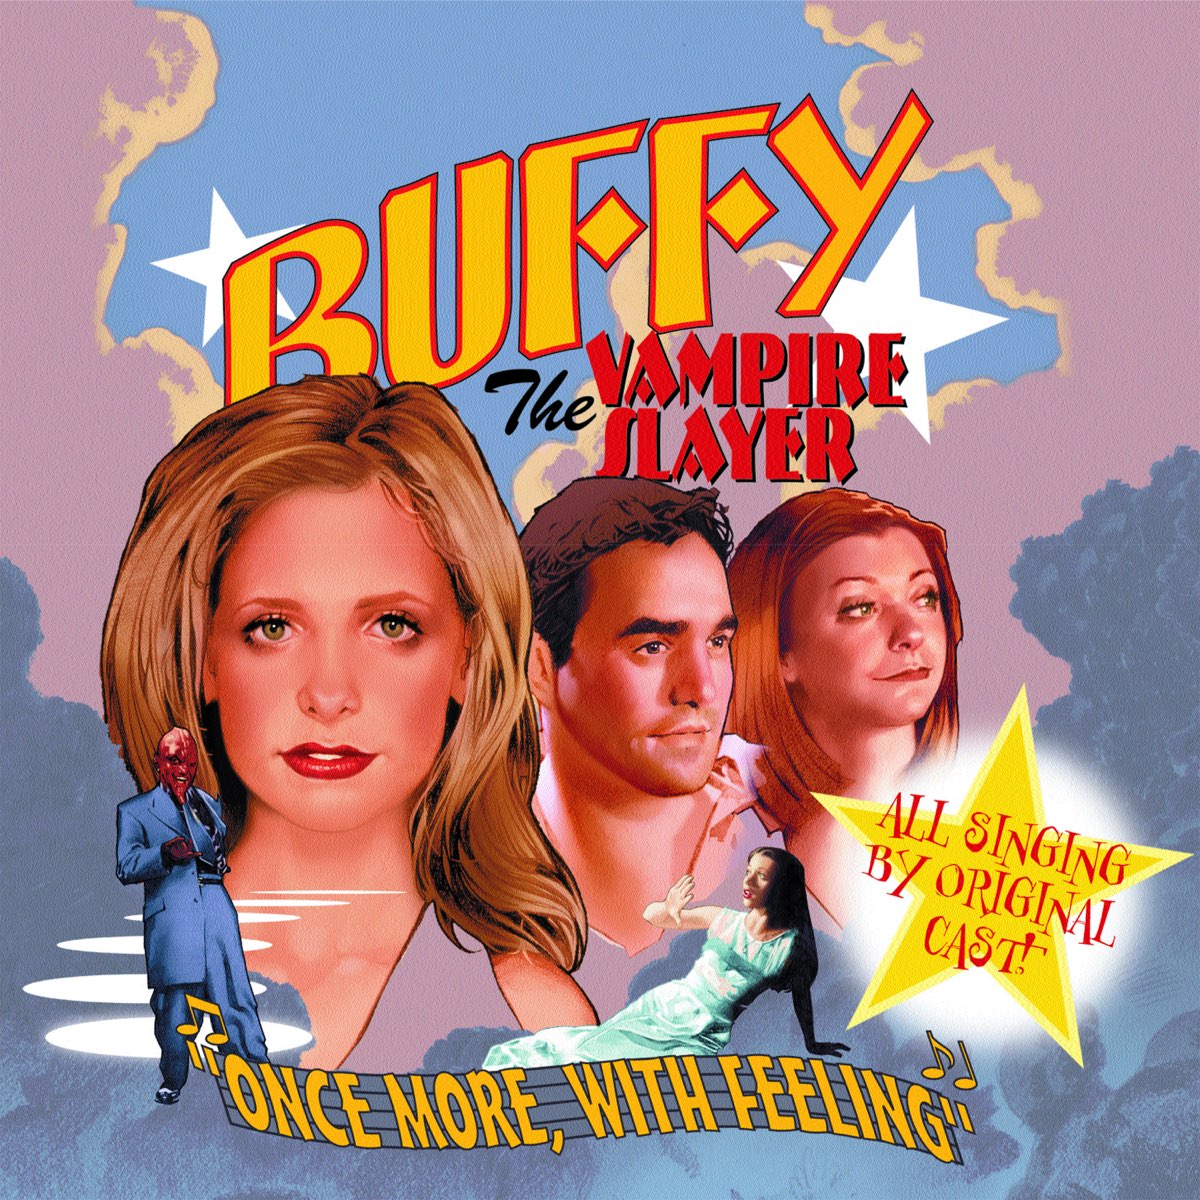 bujar thaqi recommends Buffy The Vampire Layer